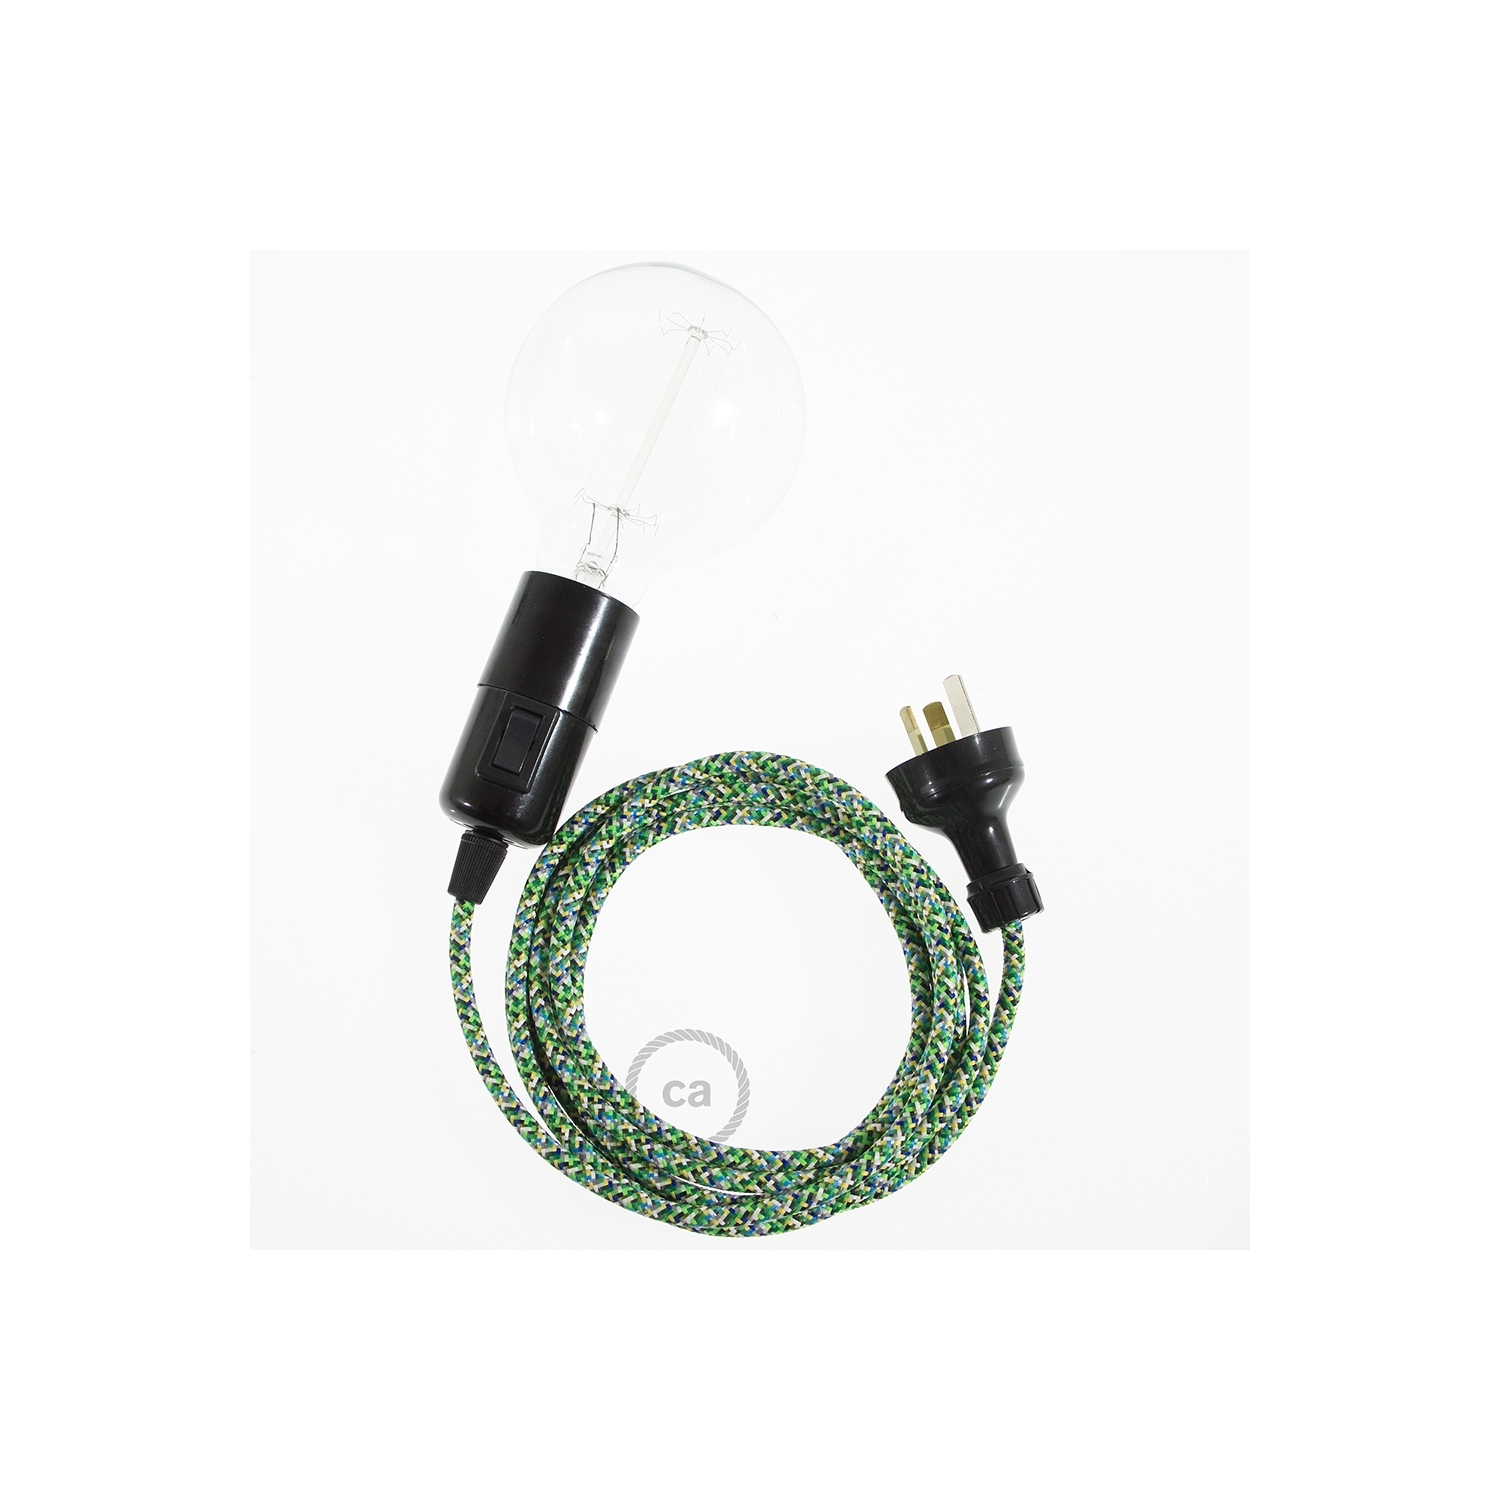 Create your RX05 Pixel Green Snake and bring the light wherever you want.